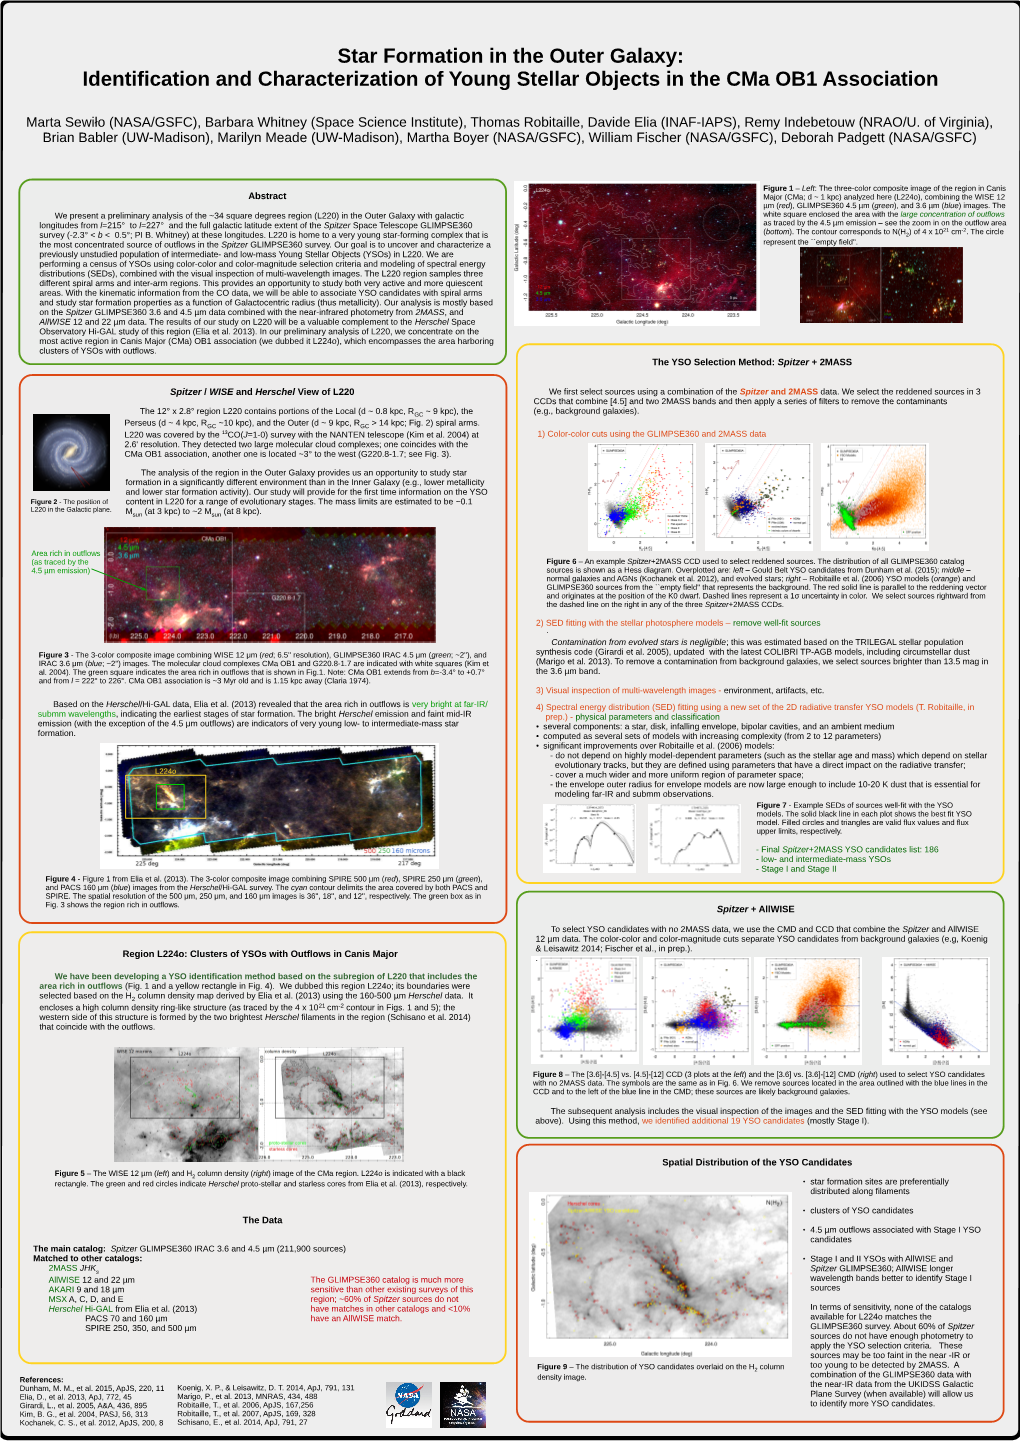 Star Formation in the Outer Galaxy: Identification and Characterization of Young Stellar Objects in the Cma OB1 Association